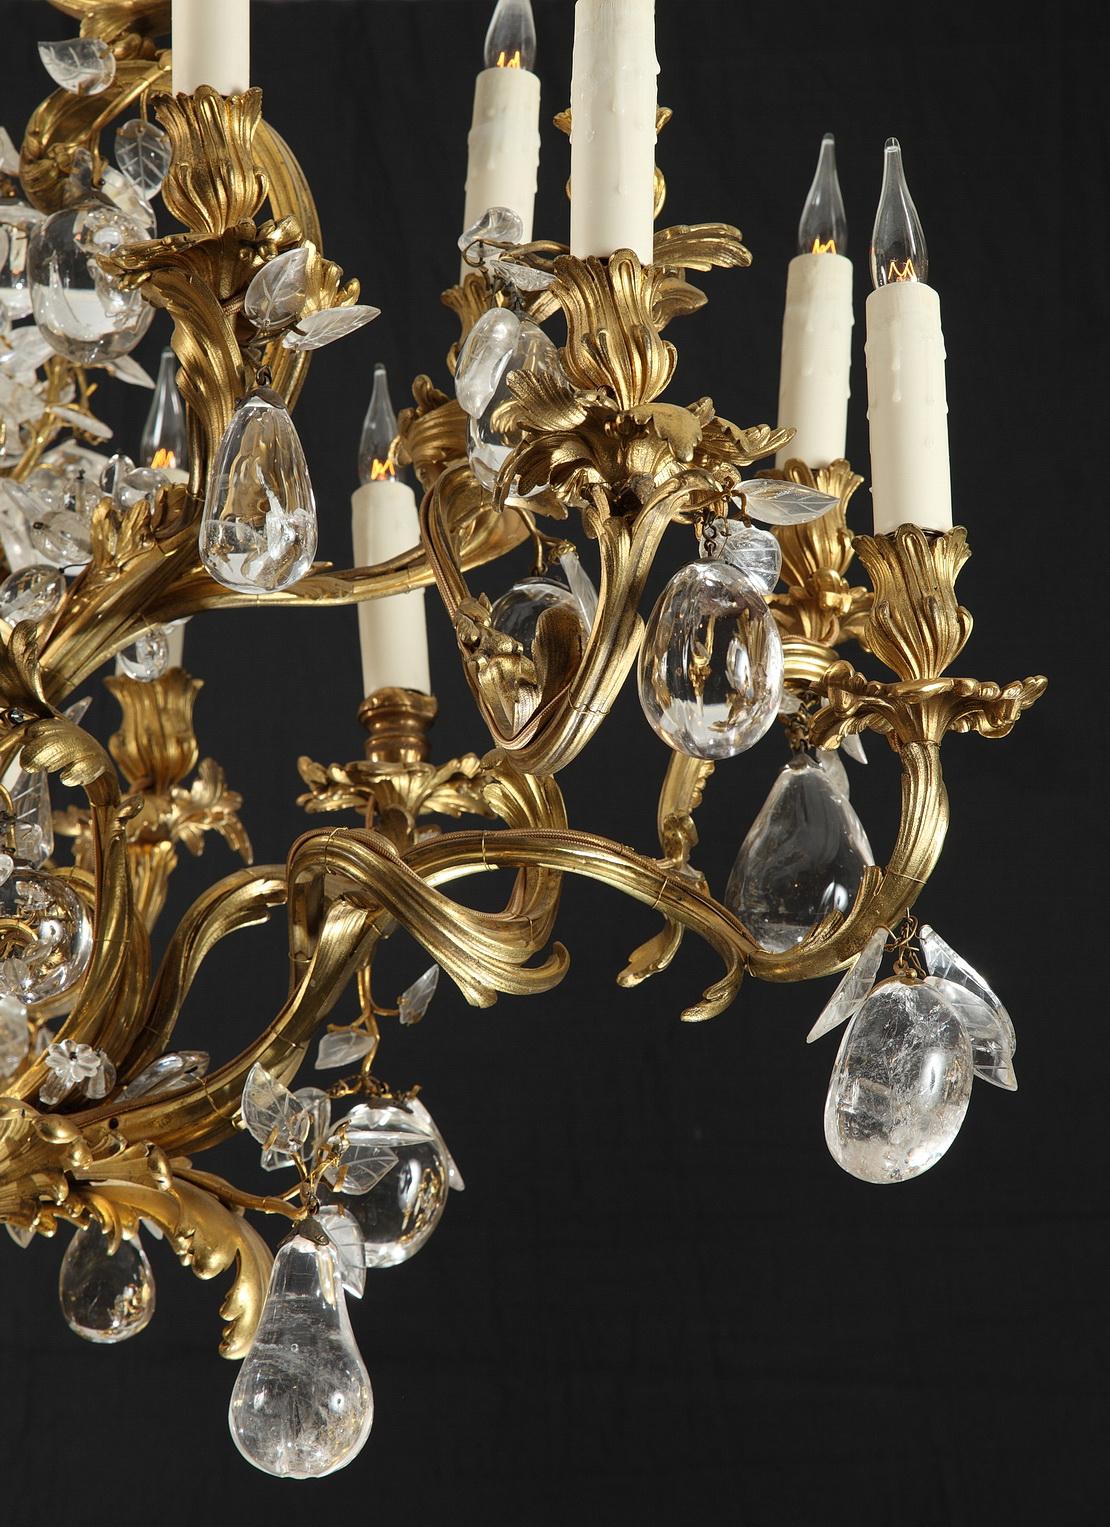 Rare Rock Crystal Chandelier Attributed to L. Messagé, France, circa 1890 For Sale 1